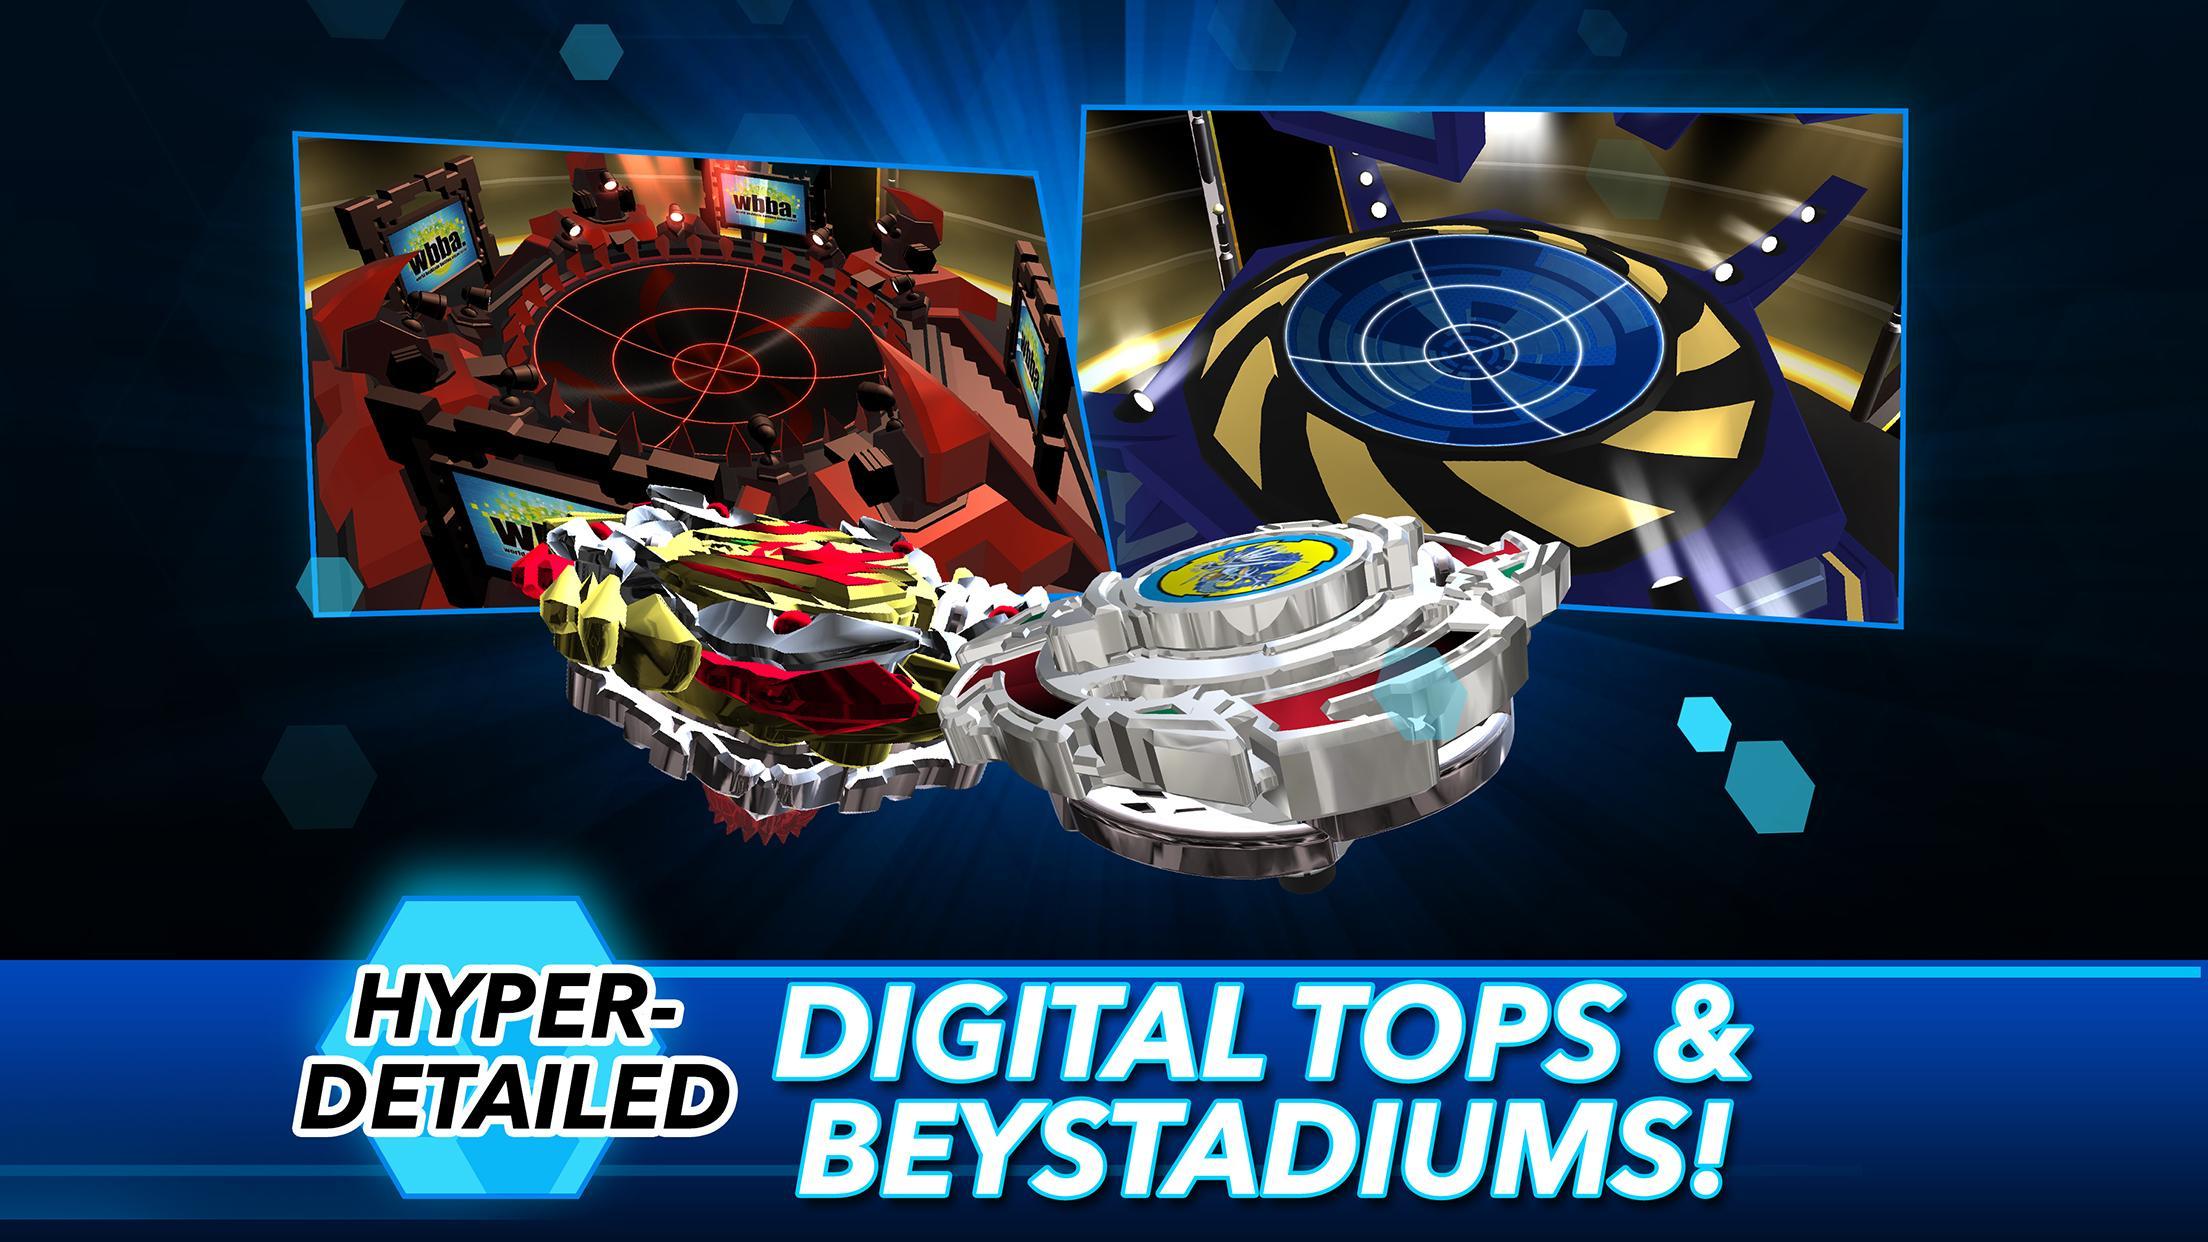 Beyblade Burst For Android Apk Download - bit beast ids on bey blade adventures roblox youtube